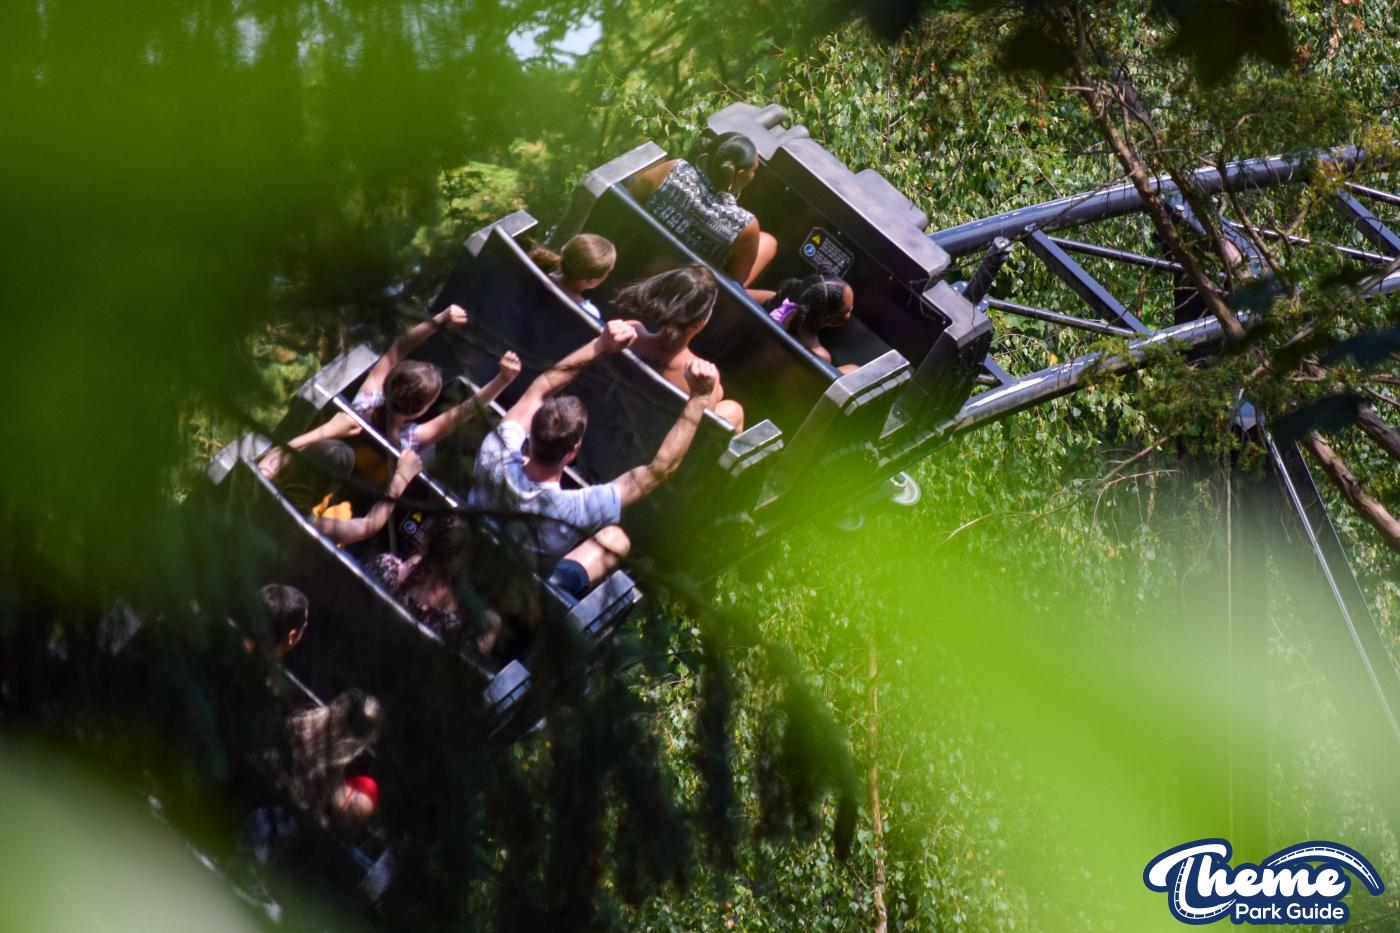 Social Distancing Removed on rollercoasters at Alton Towers